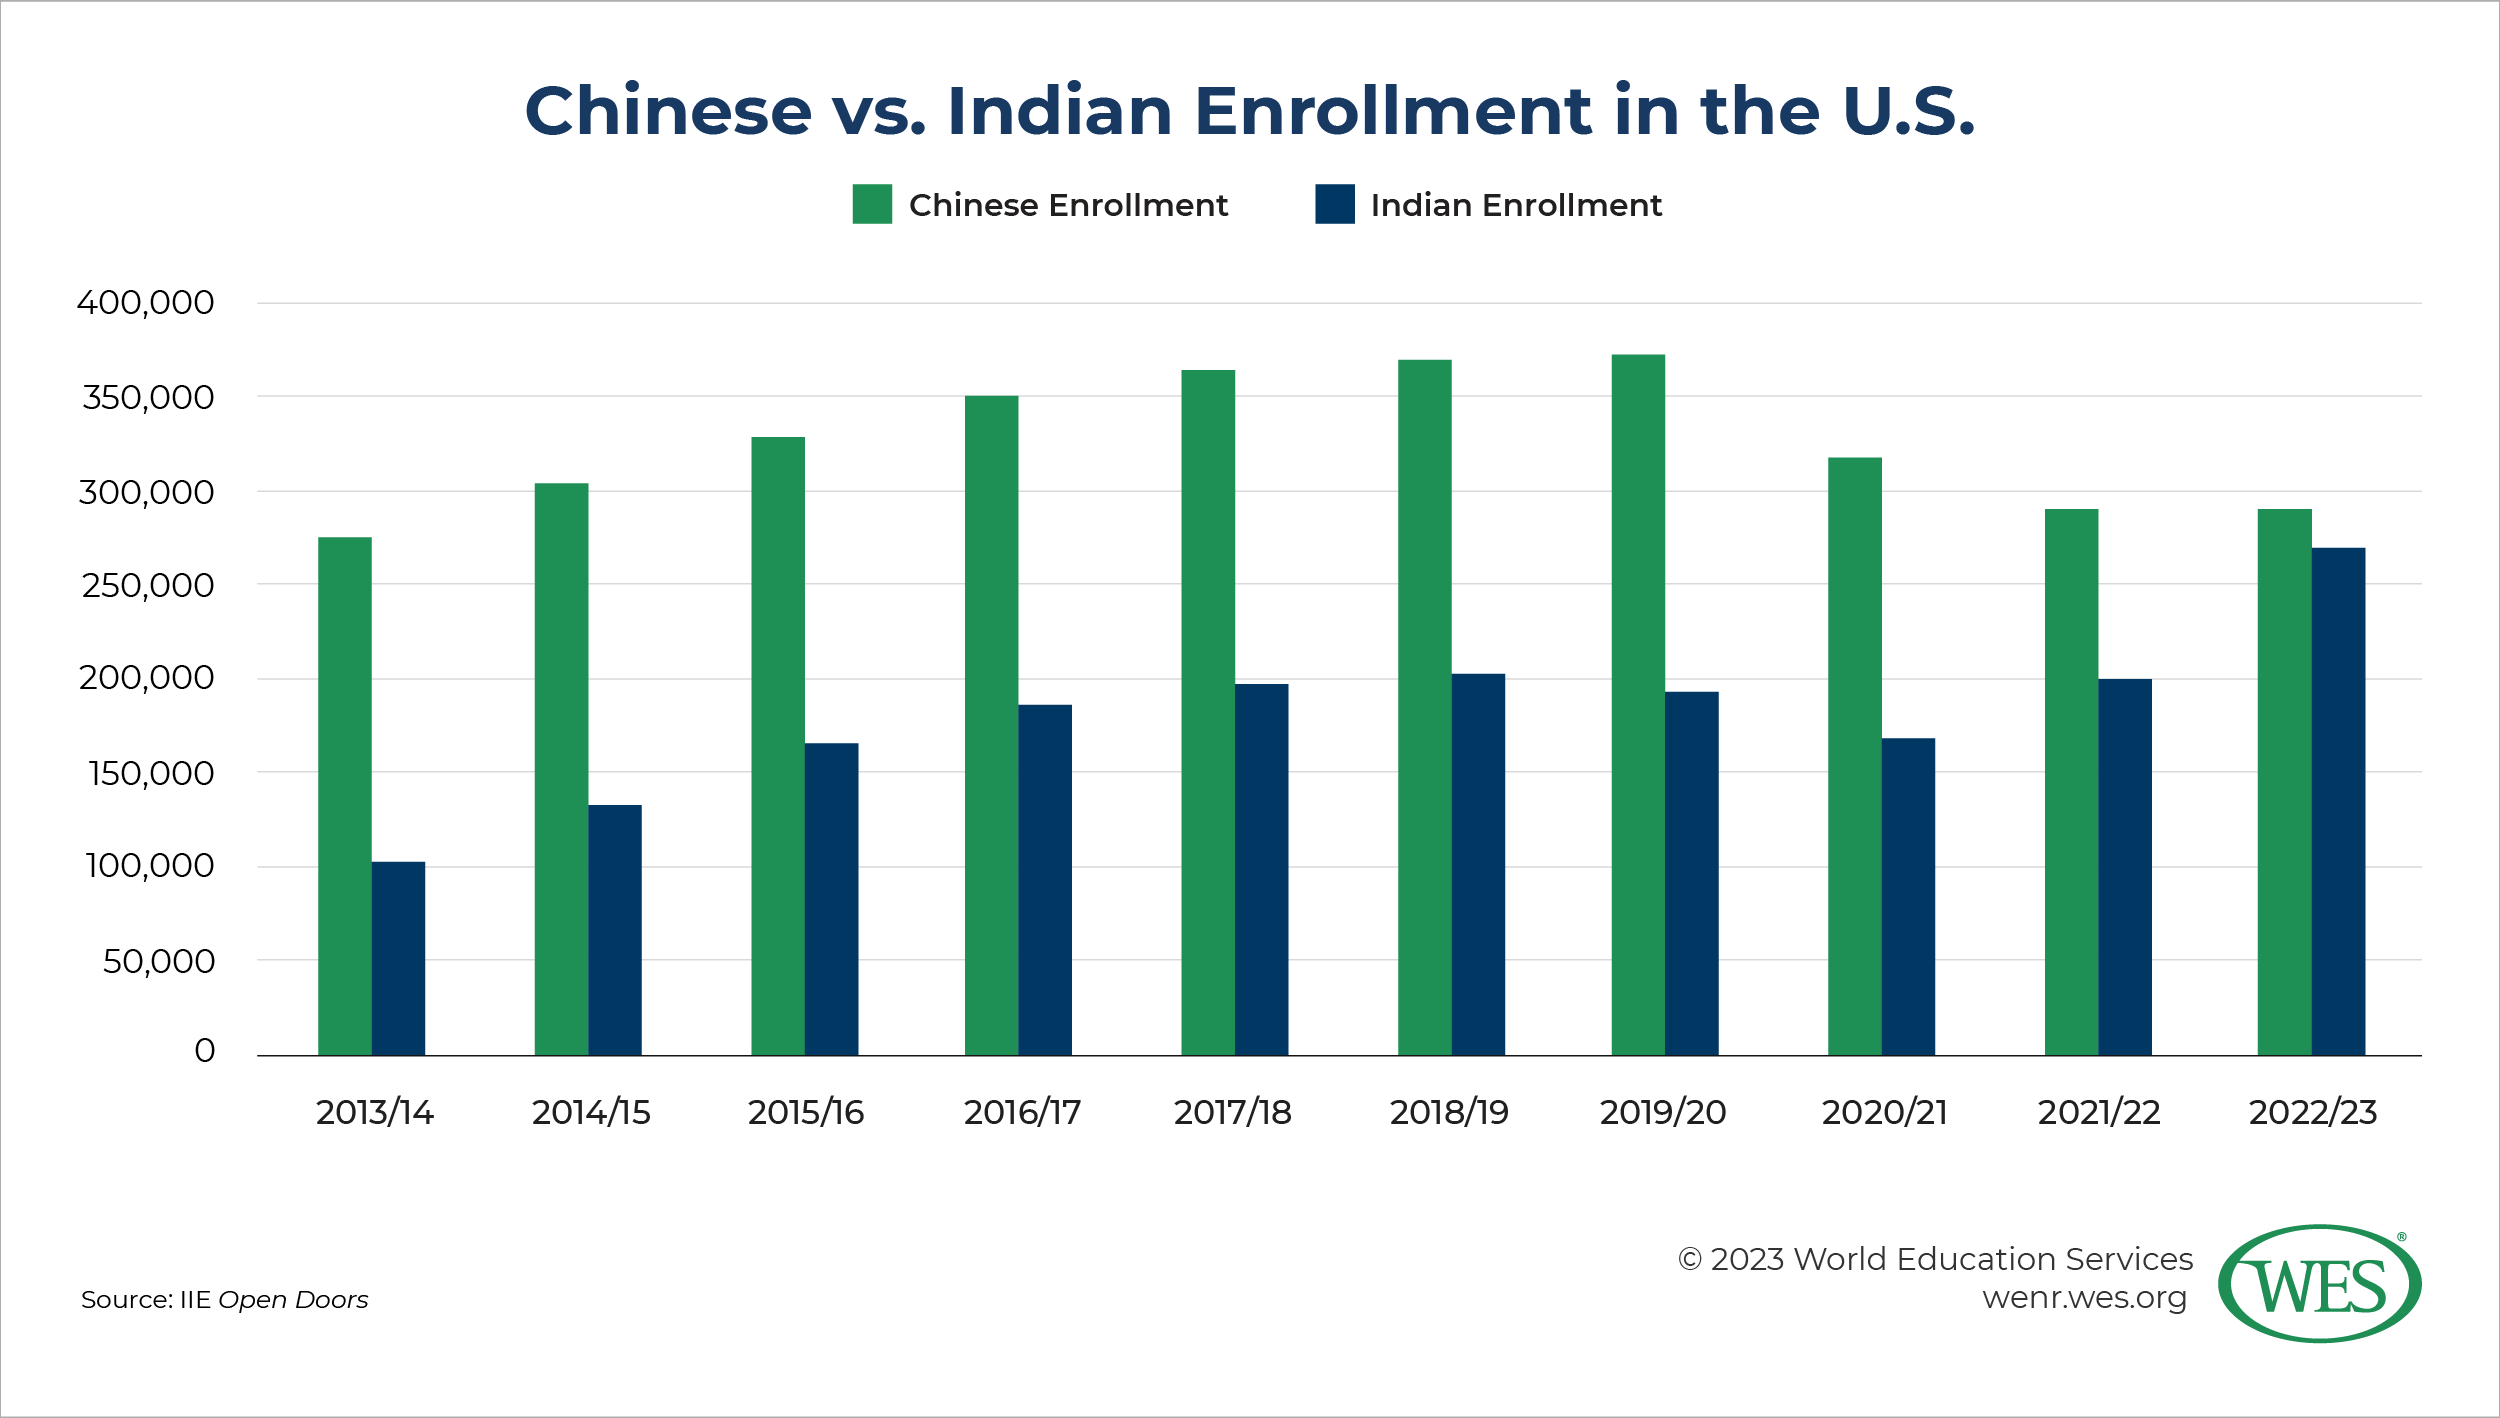 A chart comparing Chinese and Indian enrollment in the U.S. between 2013/14 and 2022/23. 